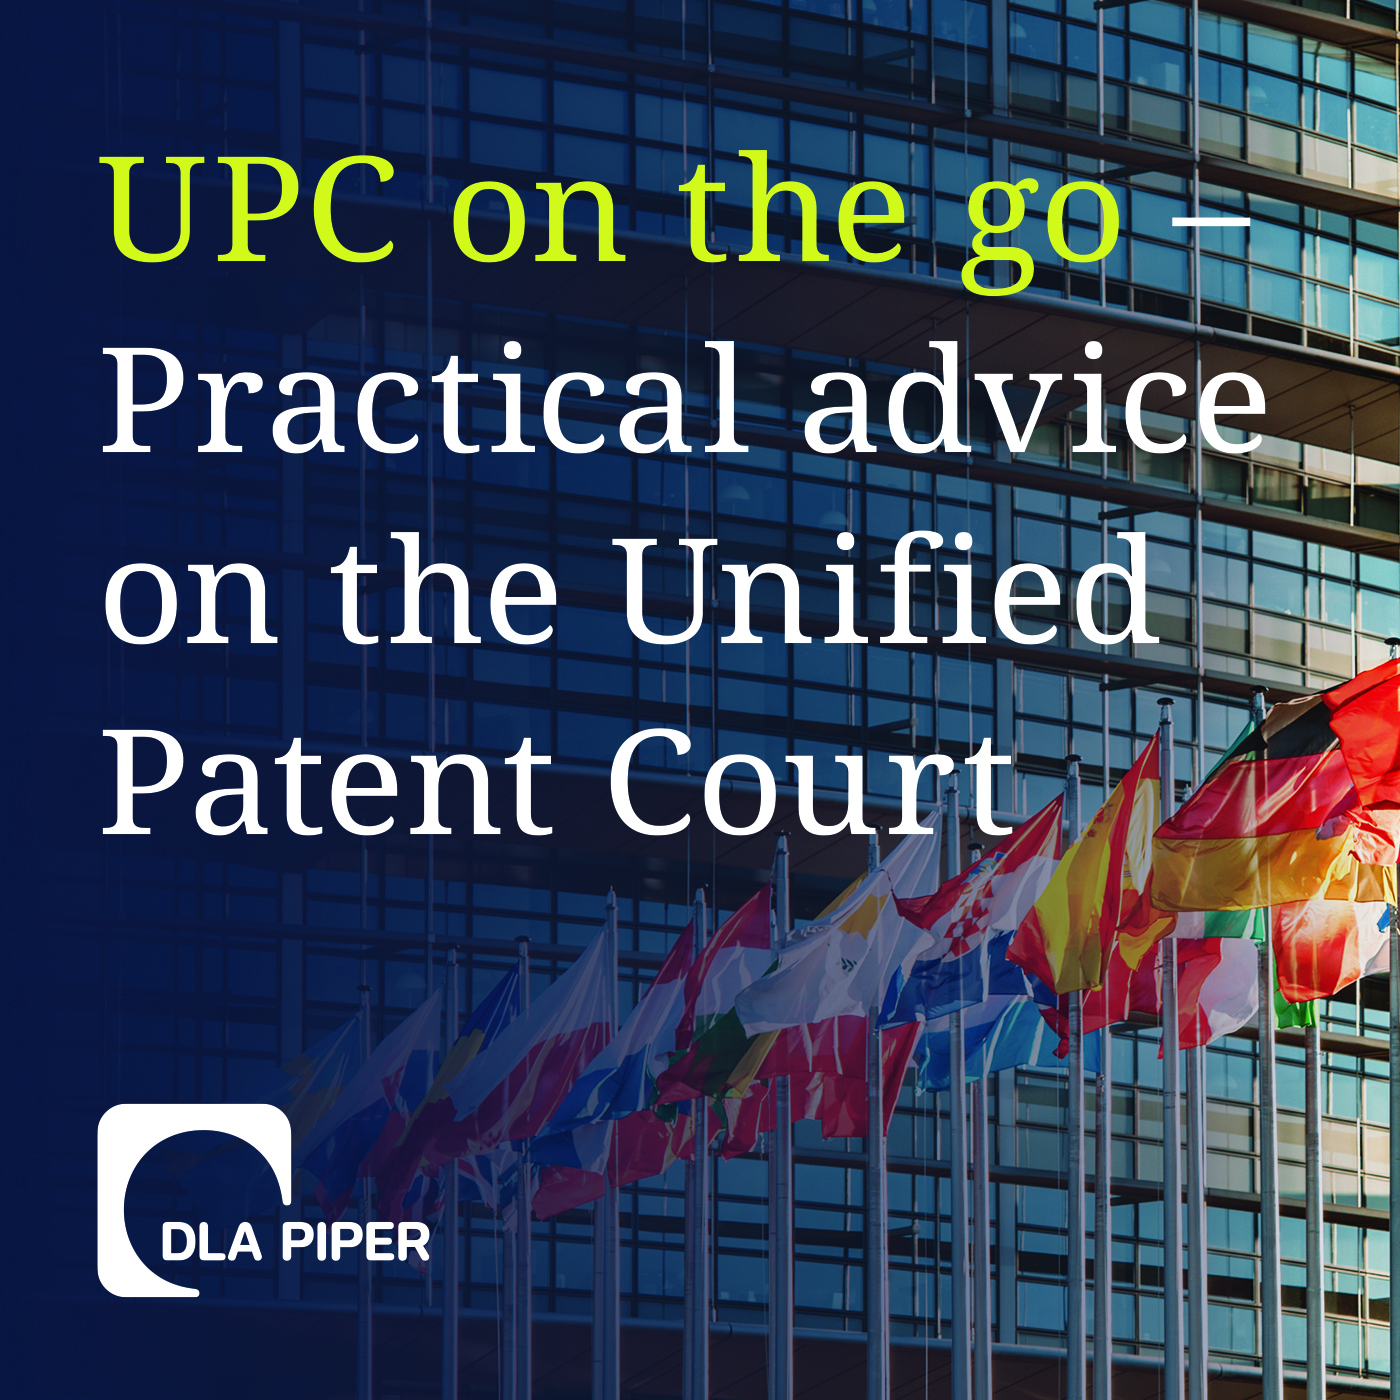 UPC on the go – Practical advice on the Unified Patent Court